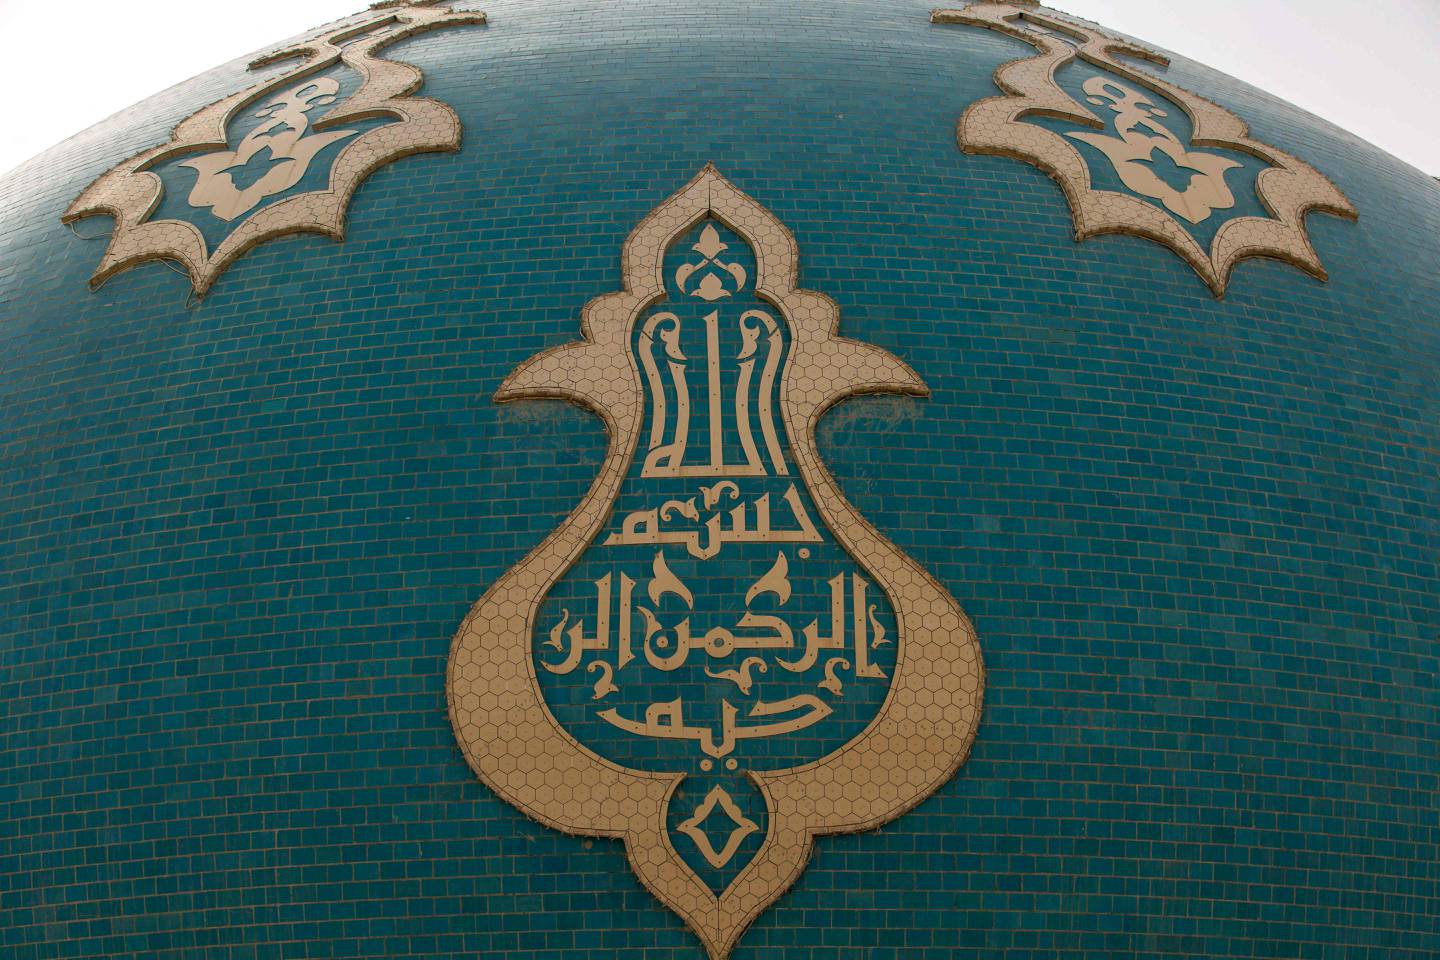 Verses from the Quran written in Kufic script,  a style of Arabic calligraphy, on the dome of the Musawi Grand Mosque in Basra.